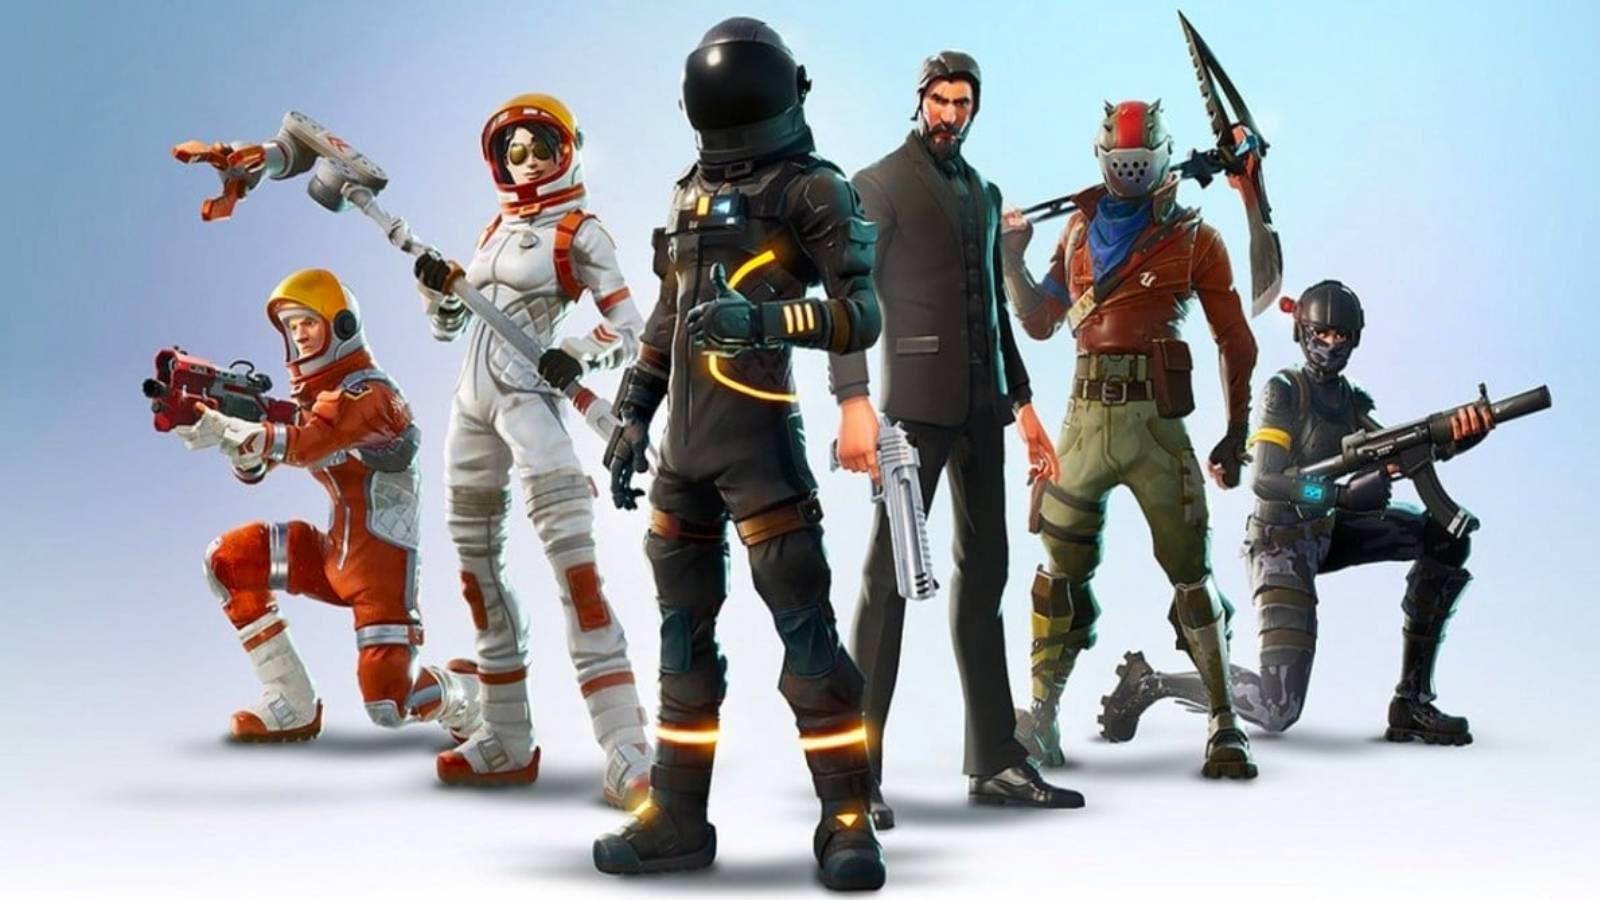 A longtime Fortnite player is baffled after getting rare skins after years